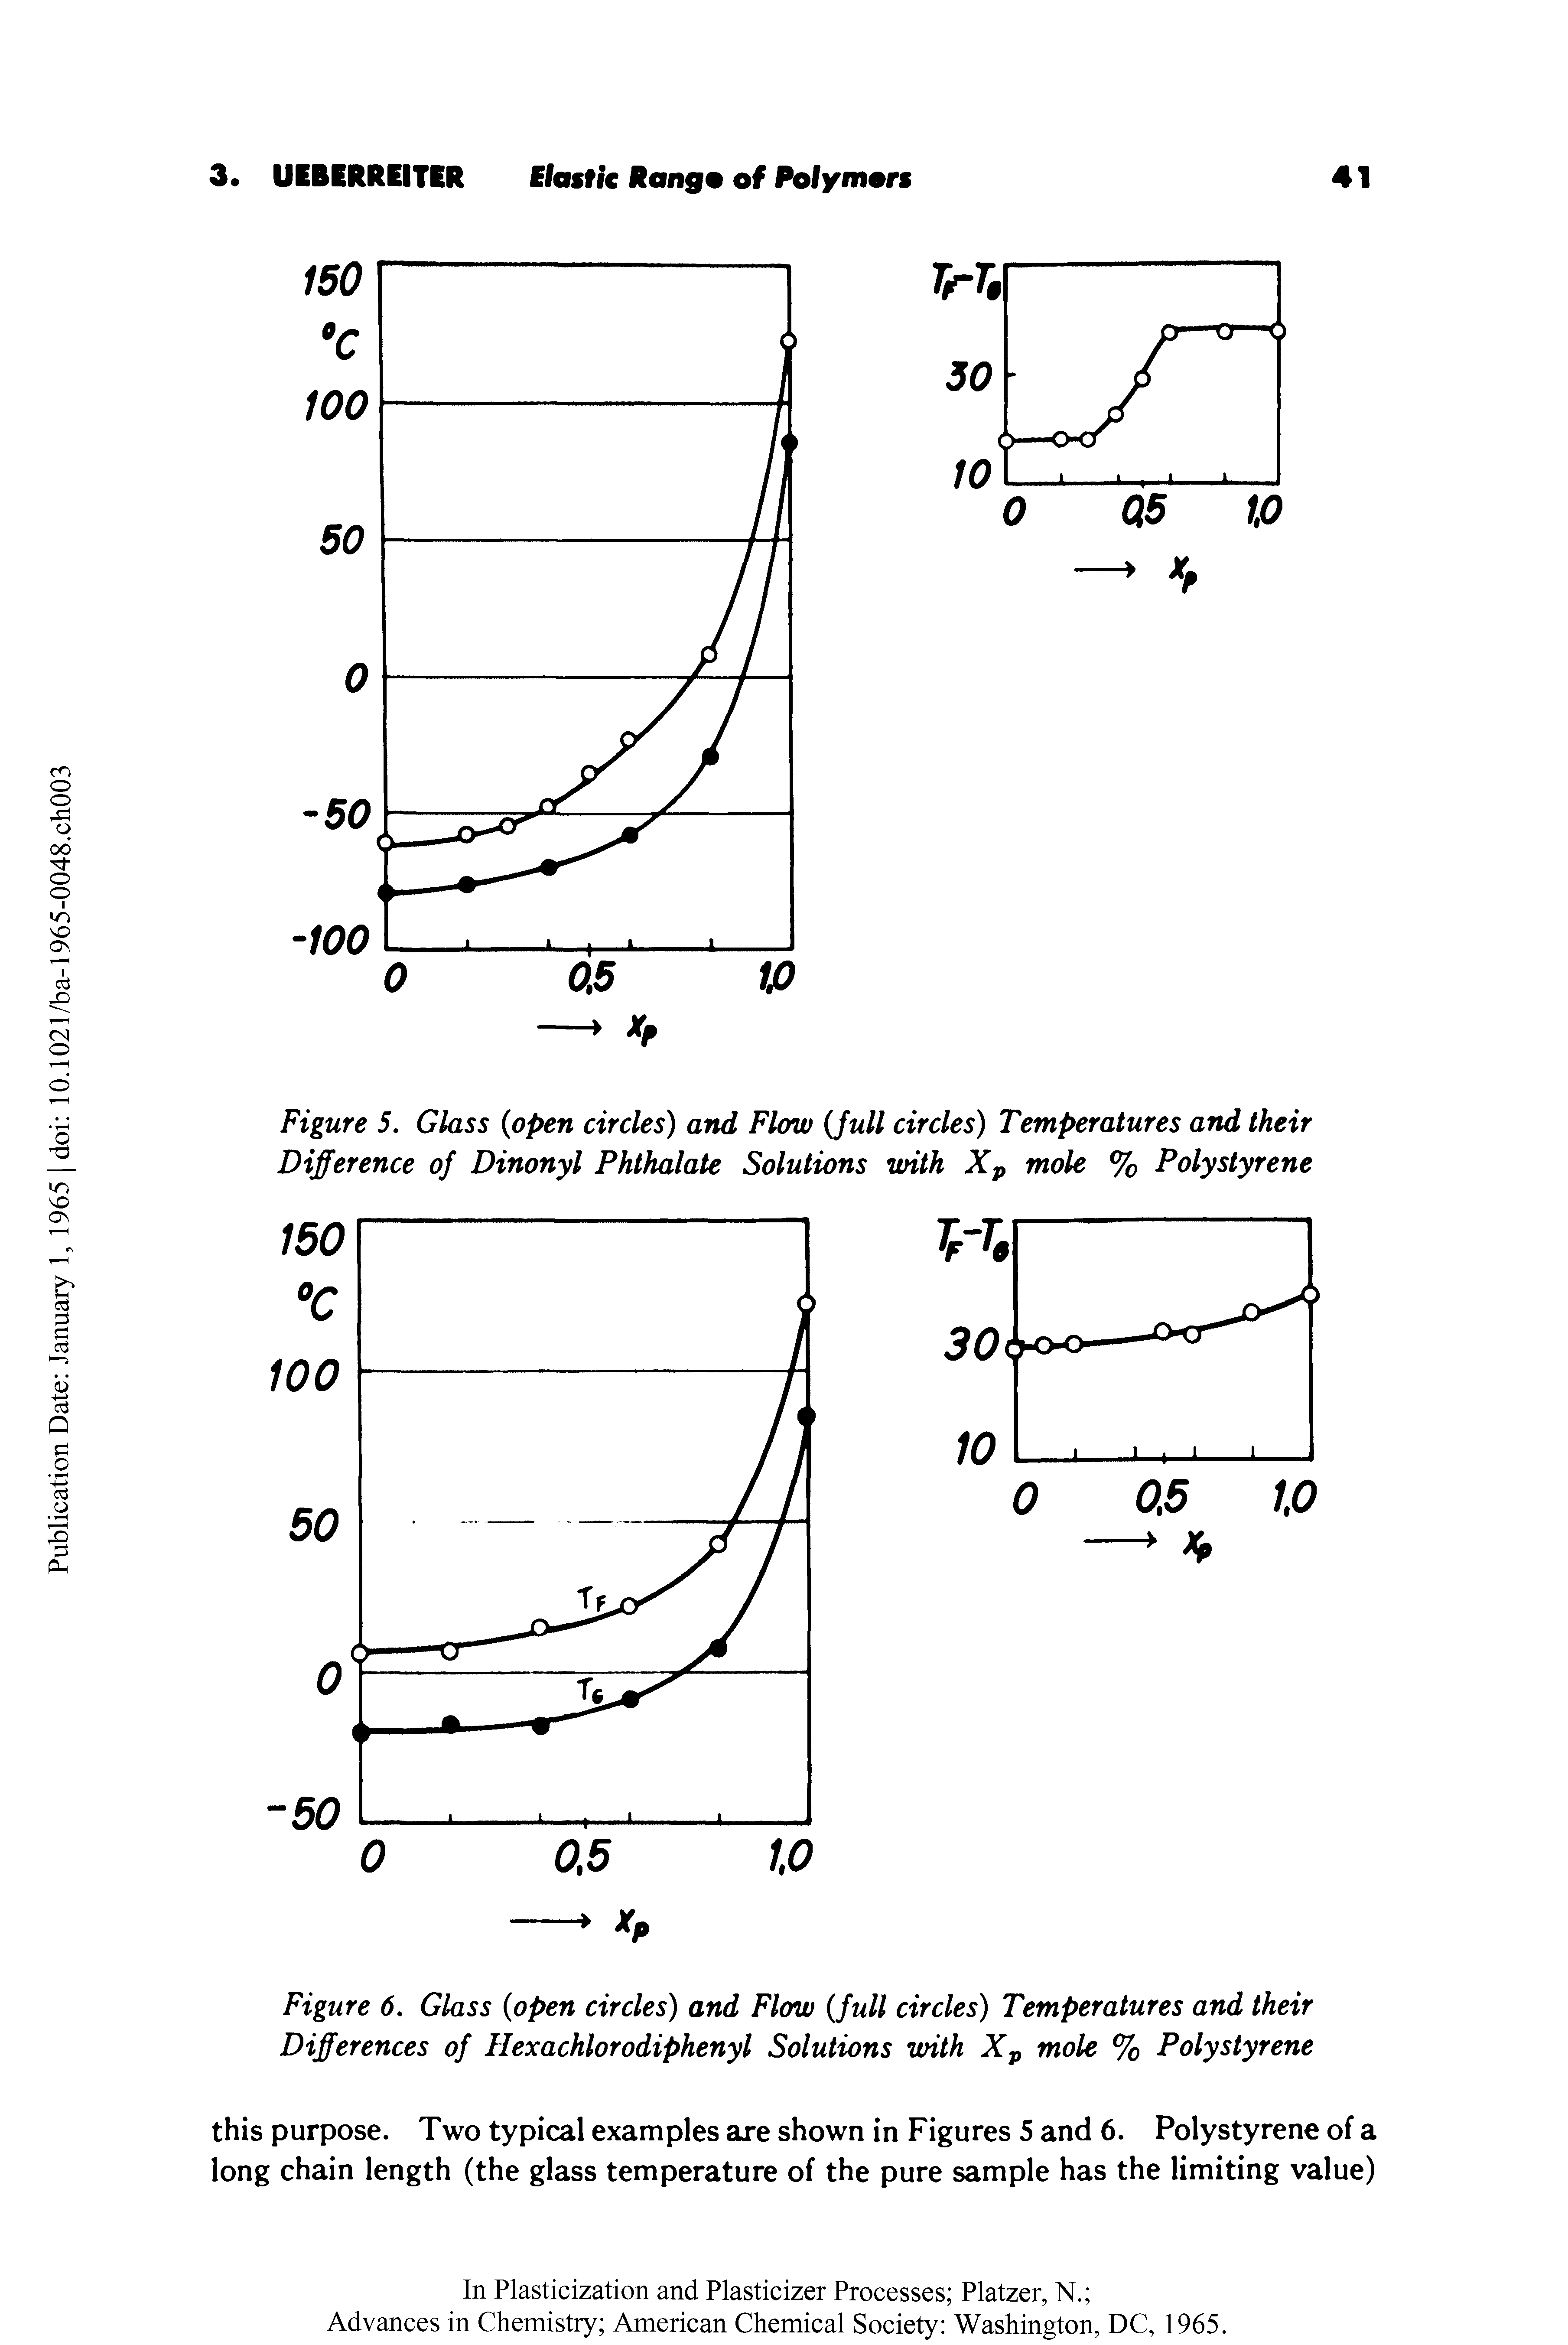 Figure 5. Glass (open circles) and Flow (full circles) Temperatures and their Difference of Dinonyl Phthalate Solutions with Xp mole % Polystyrene...